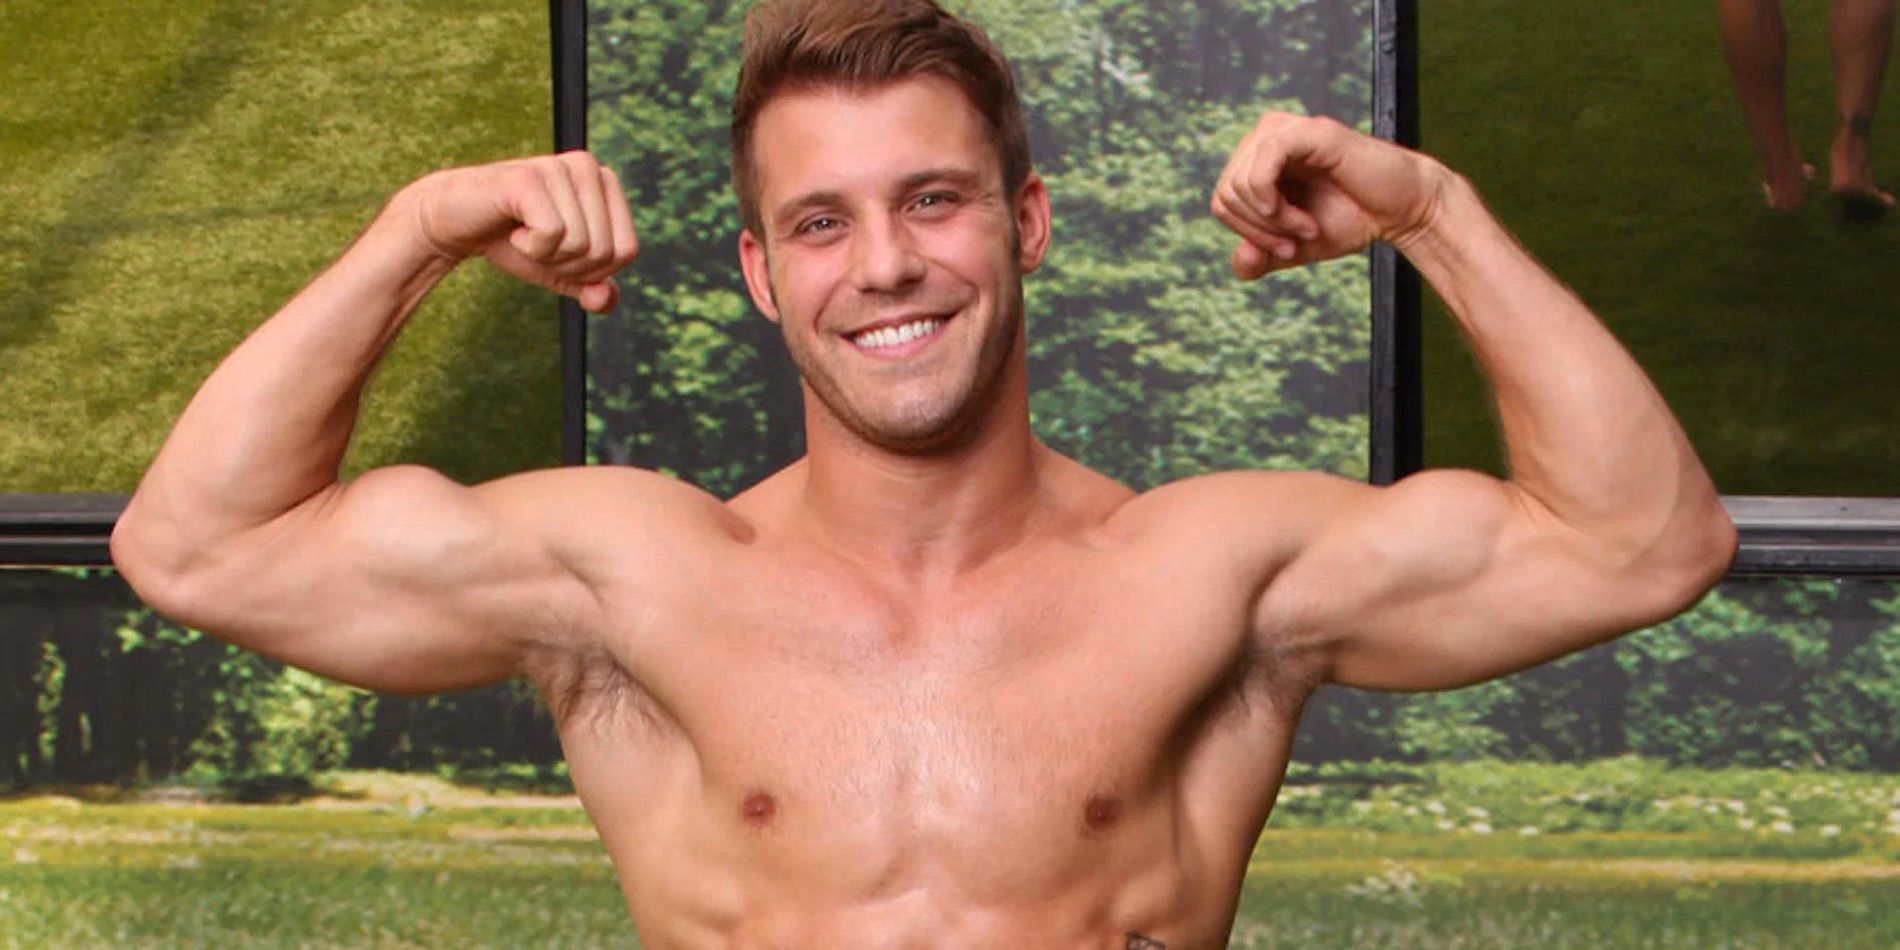 Paulie Calafiore flexing his muscles in Big Brother The Challenge